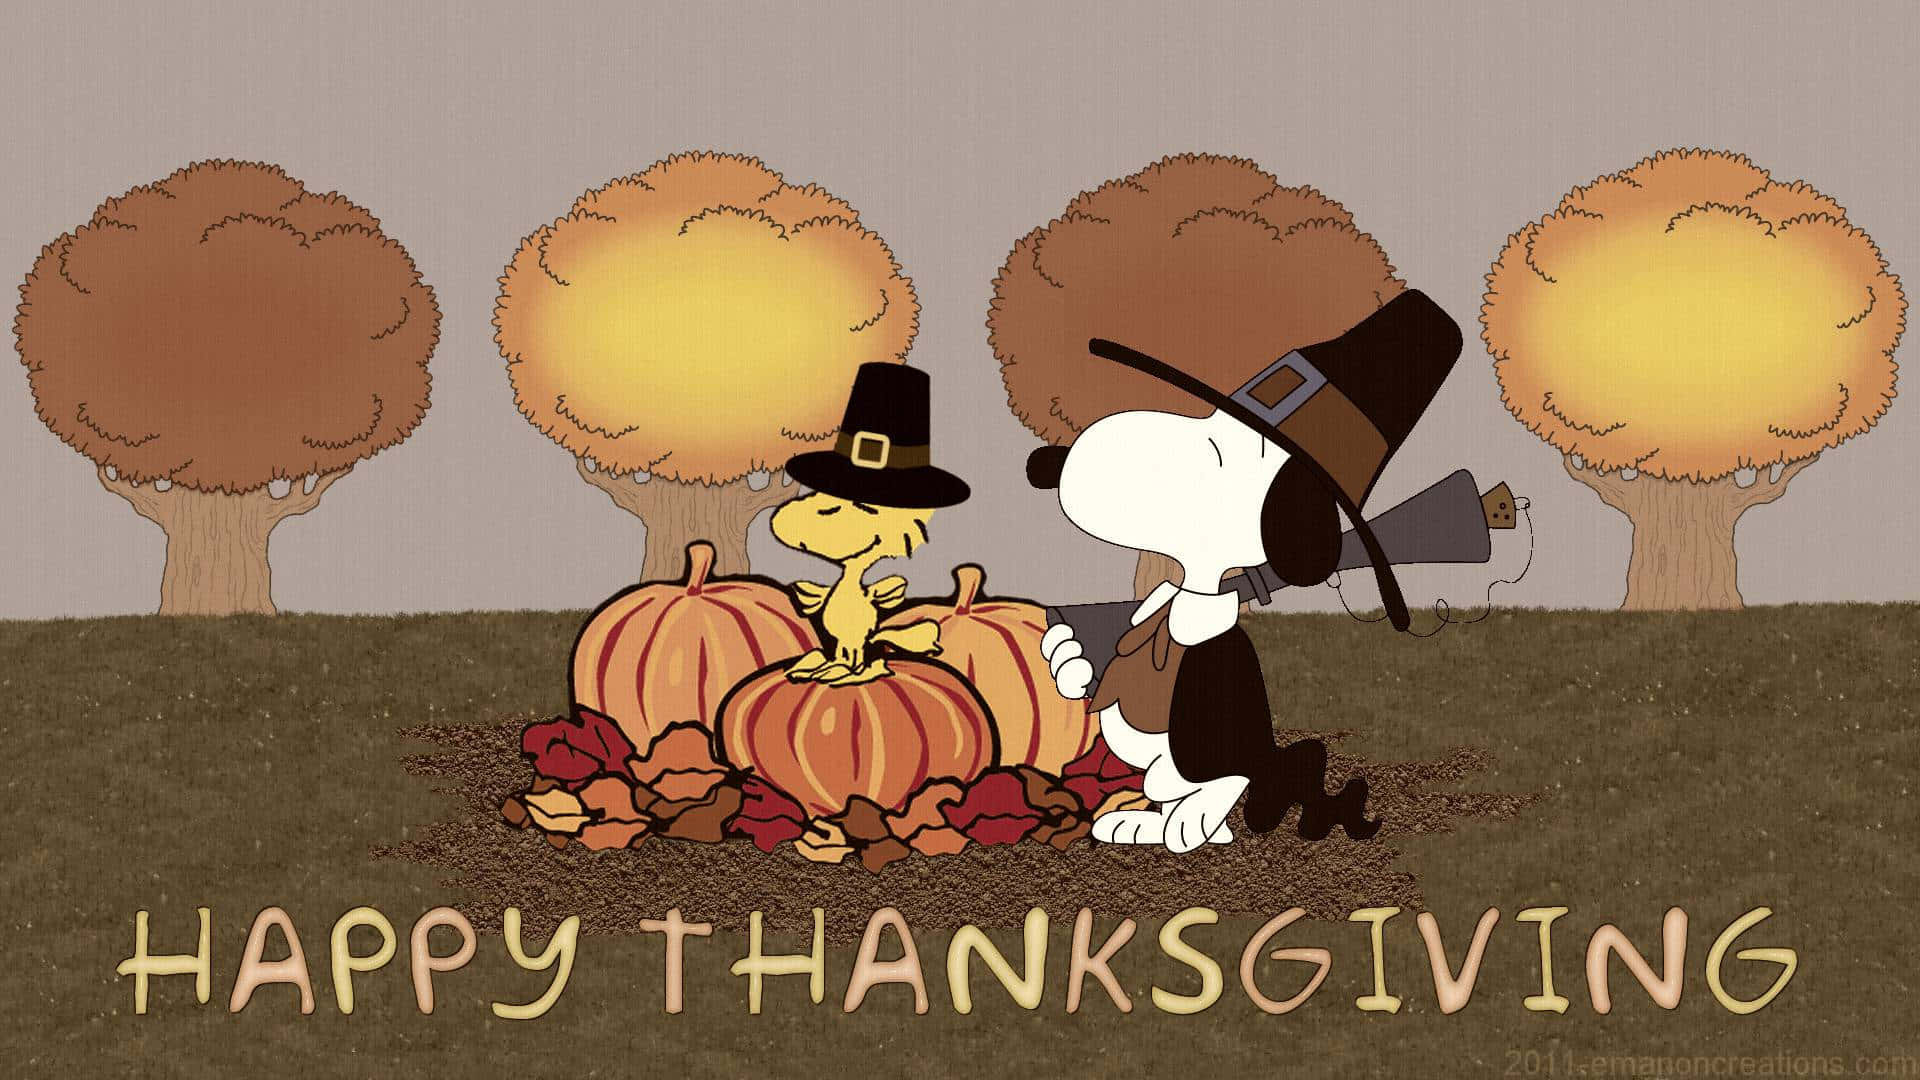 Snoopy Celebrates Thanksgiving with Family Wallpaper